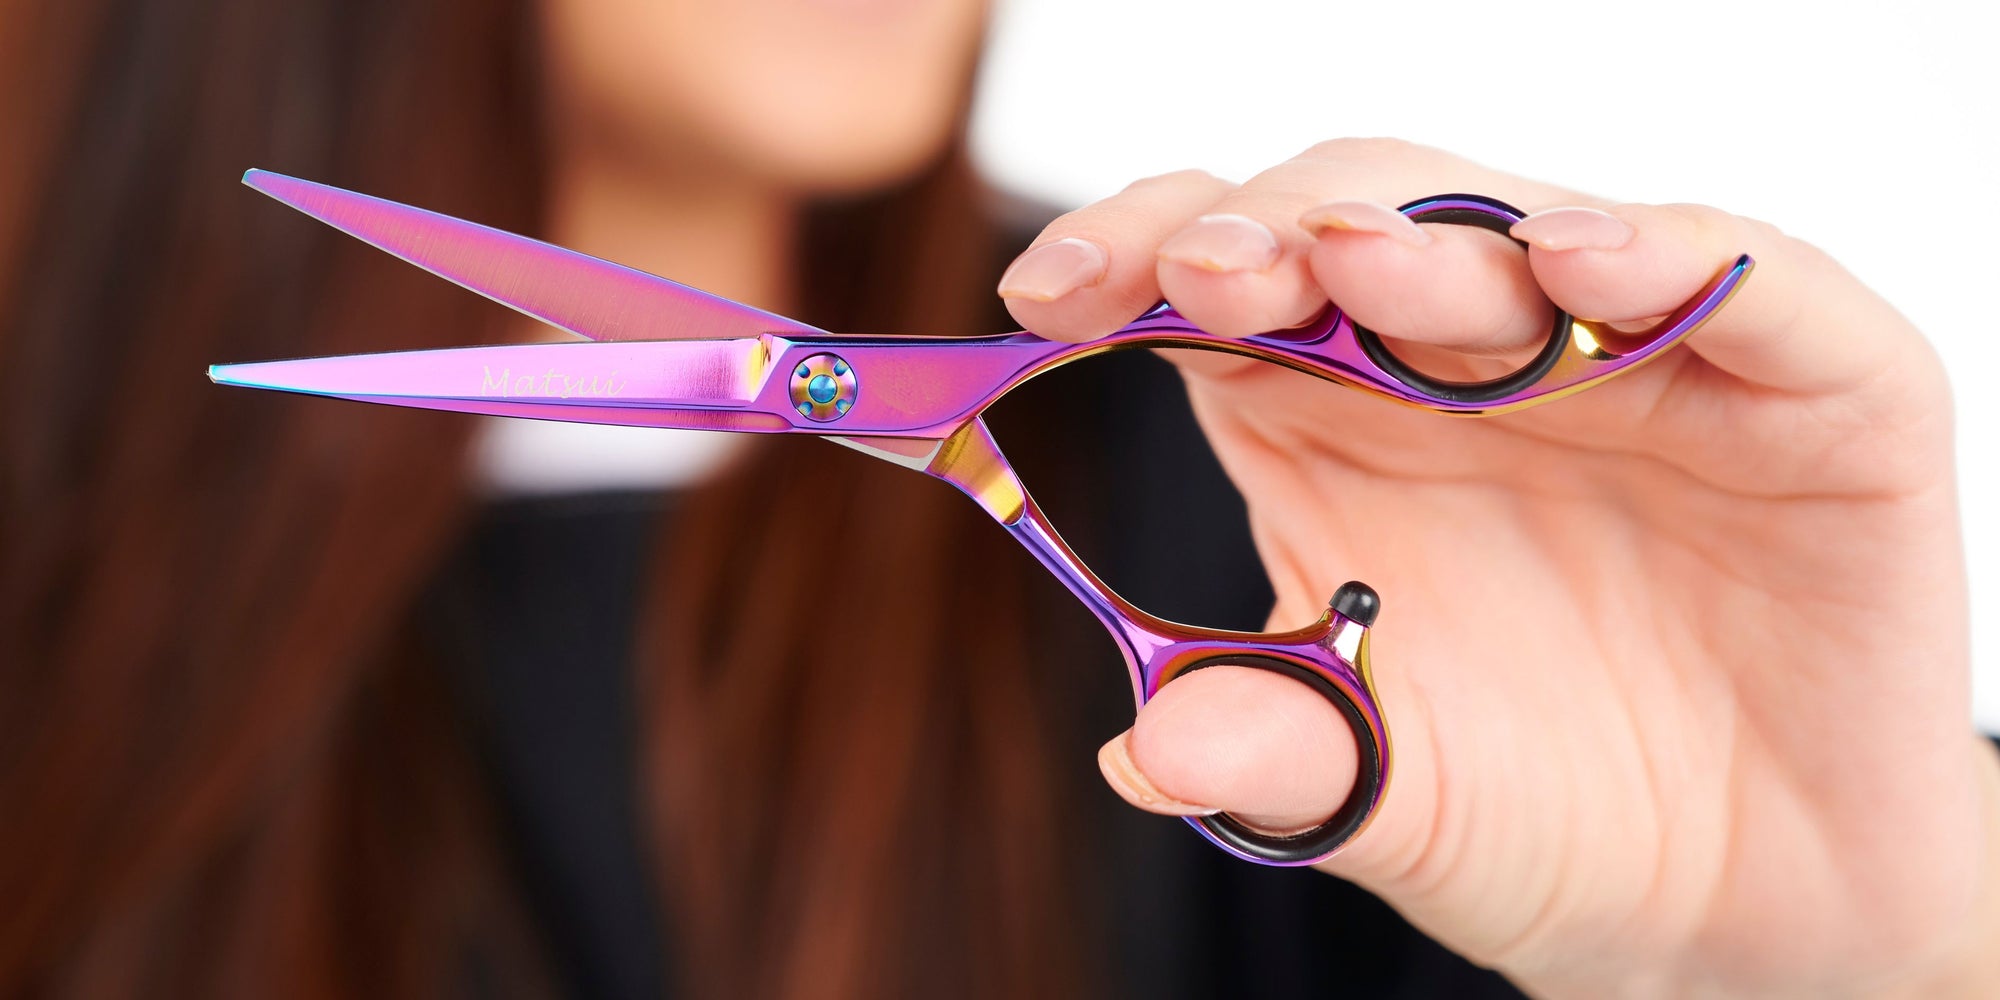 How to Tension and Care for your scissors